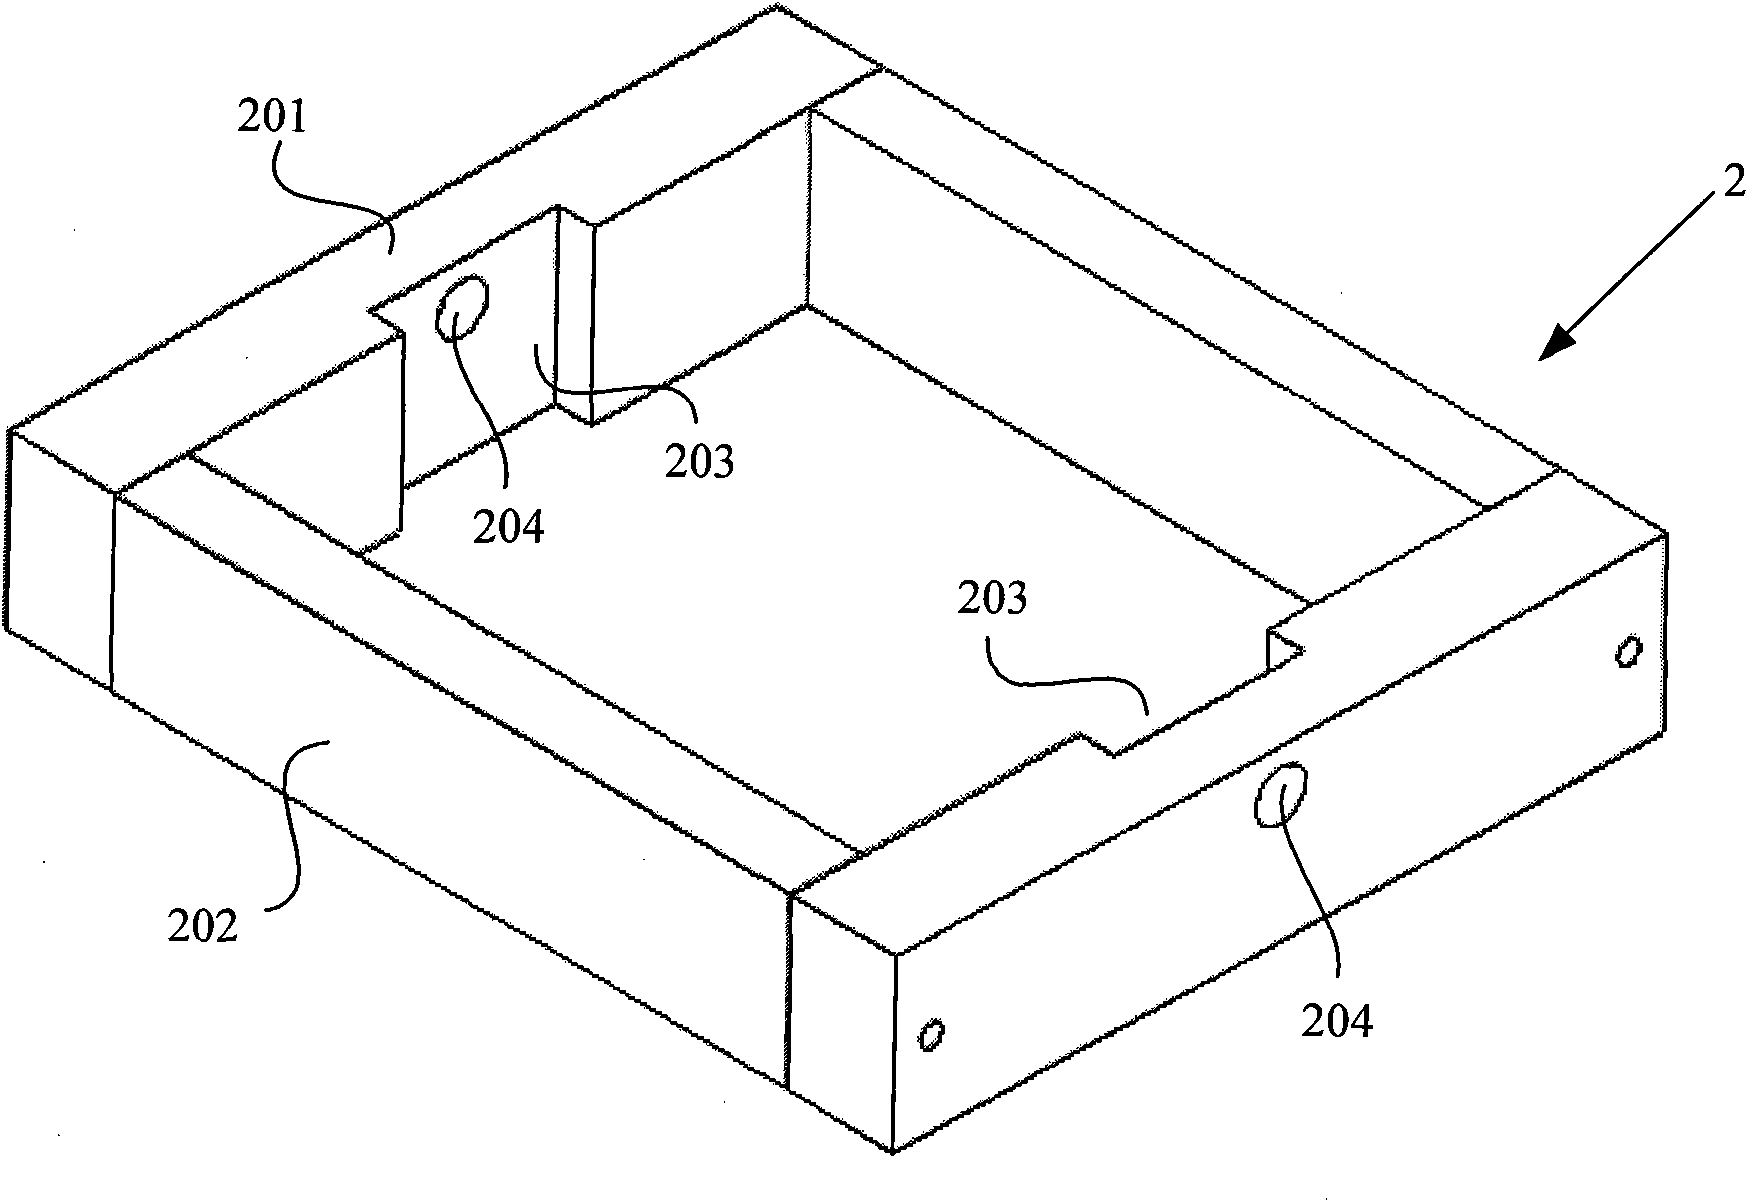 Stretch-electricity combinational stimulation cell culture device